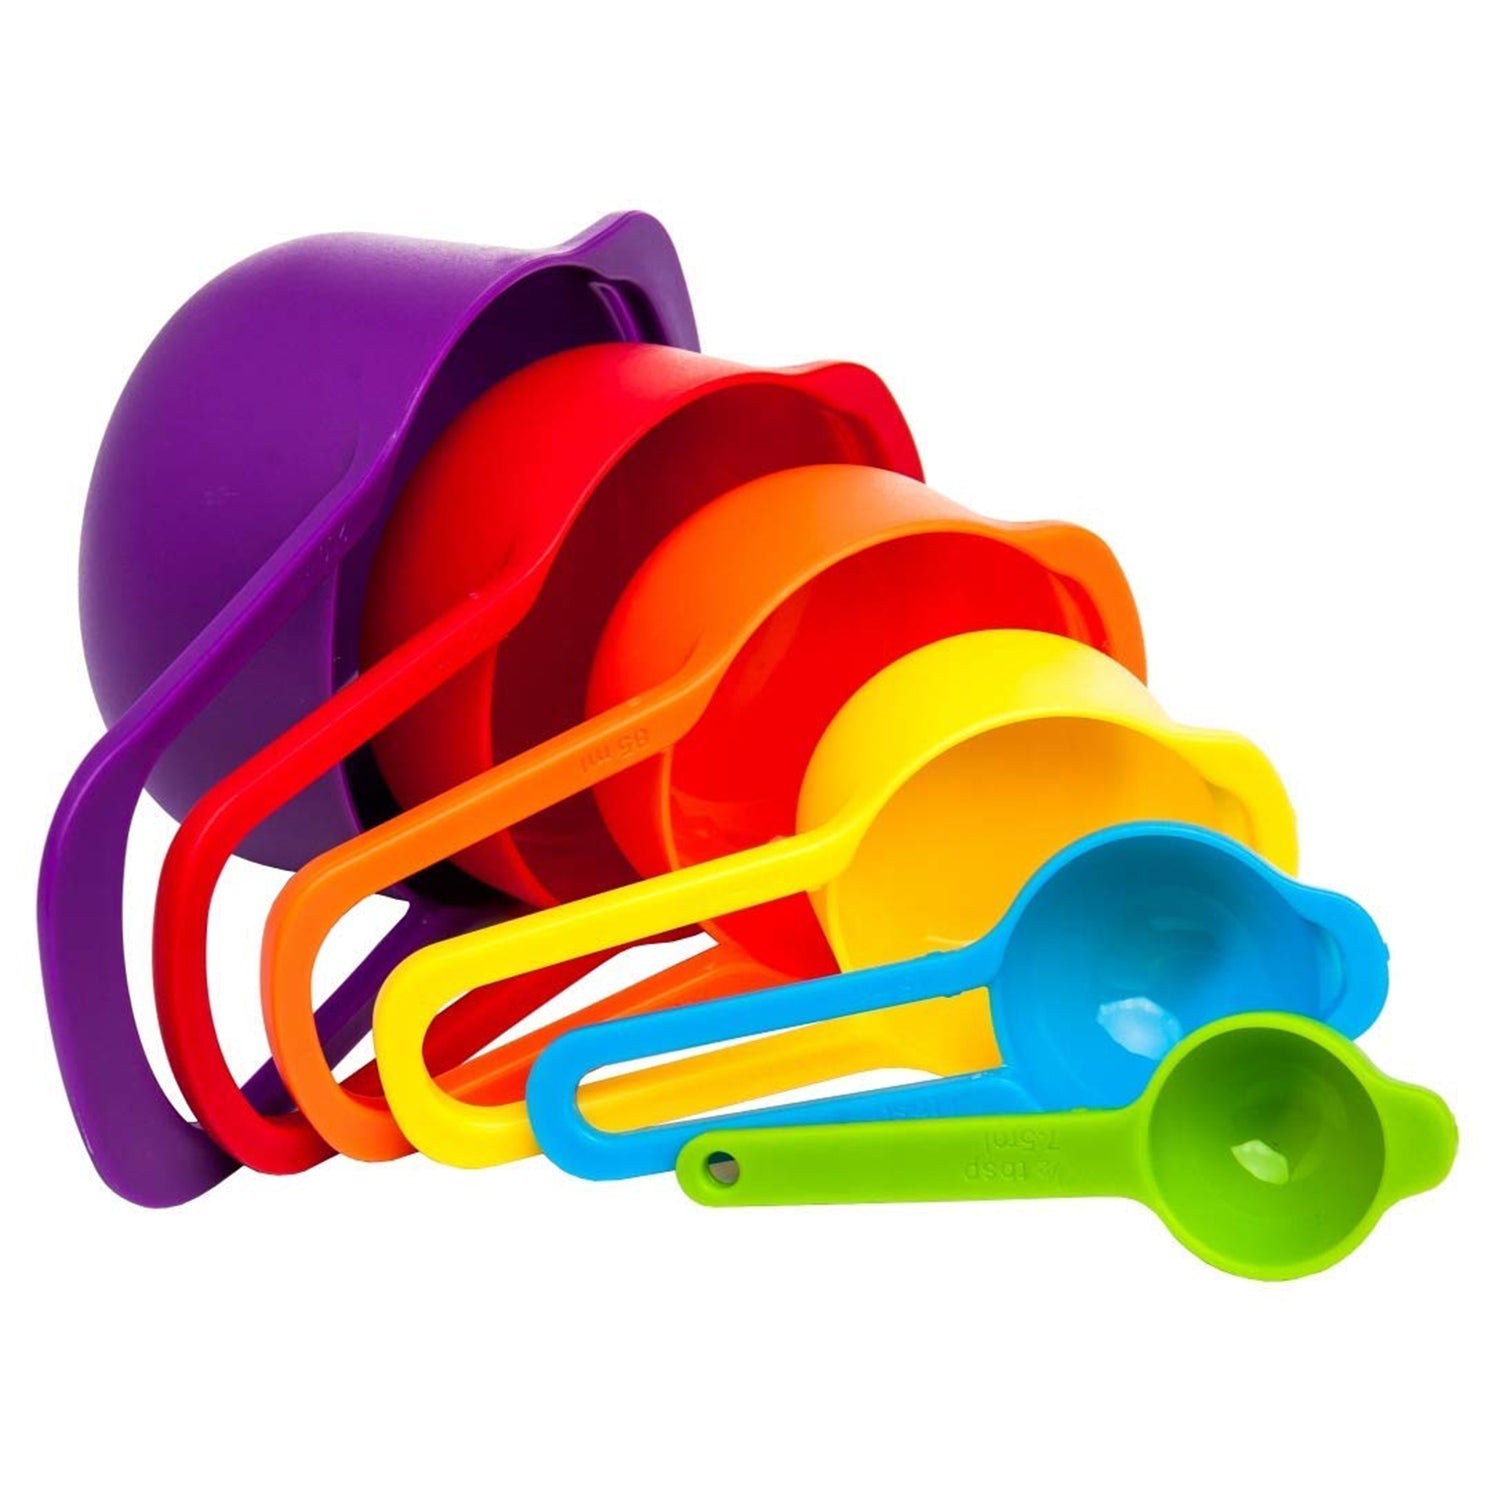 0811A Plastic Measuring Spoons for Kitchen (6 pack) DeoDap